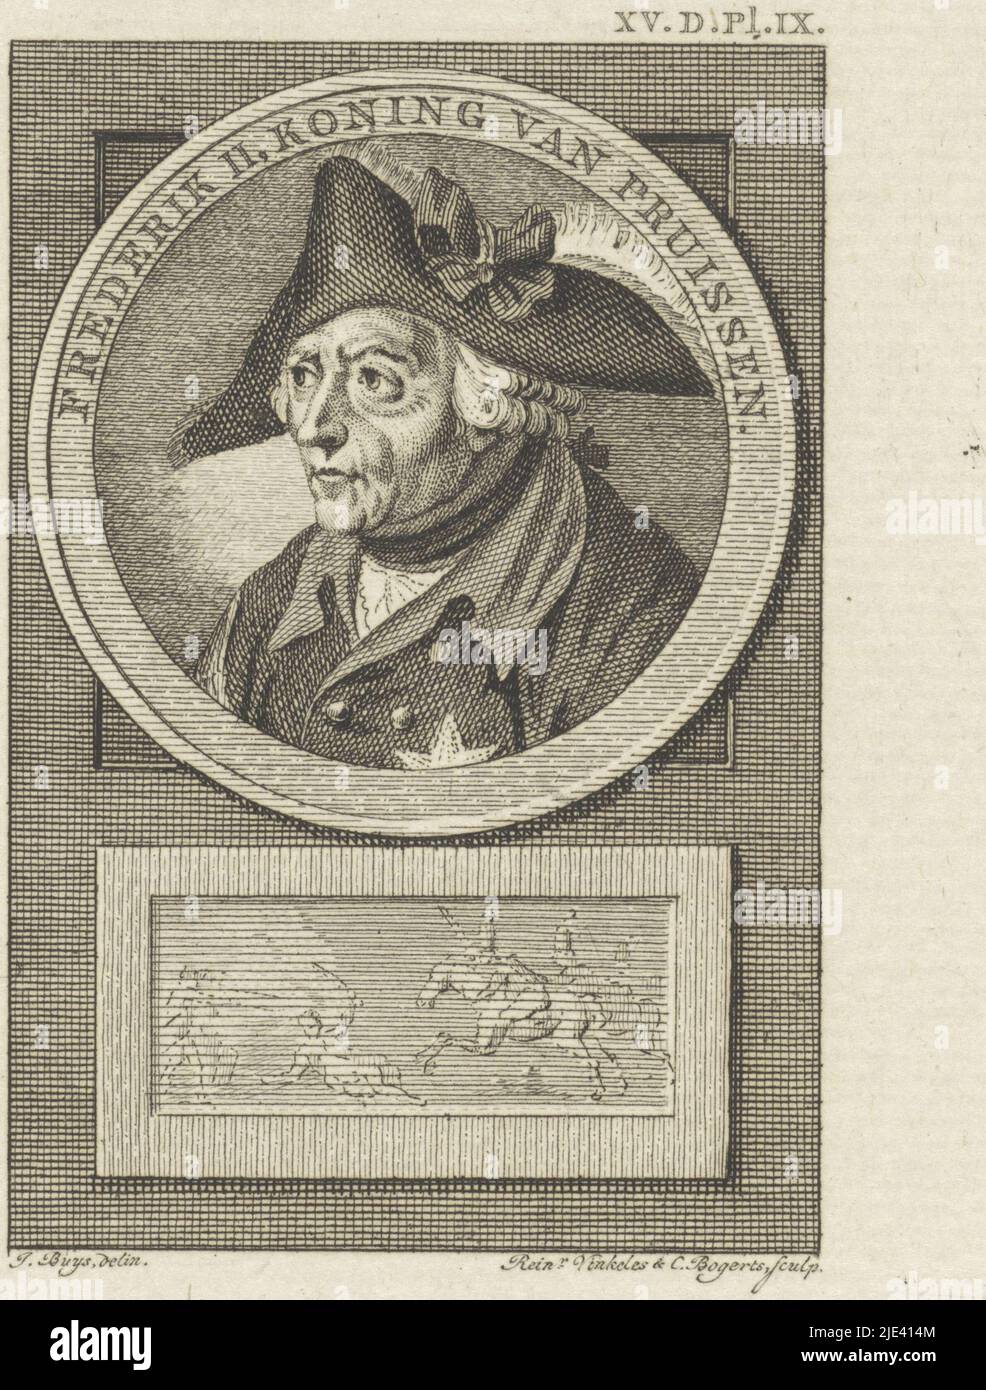 Portrait of Frederick the Great, Reinier Vinkeles (I), after Jacobus Buys, 1783 - 1795, Portrait of Frederick the Great, King of Prussia. Below the portrait and battle with horsemen. Top right: XV.D.Pl.IX., print maker: Reinier Vinkeles (I), (mentioned on object), print maker: Cornelis Bogerts, (mentioned on object), intermediary draughtsman: Jacobus Buys, (mentioned on object), Amsterdam, 1783 - 1795, paper, etching, engraving, h 169 mm × w 112 mm Stock Photo